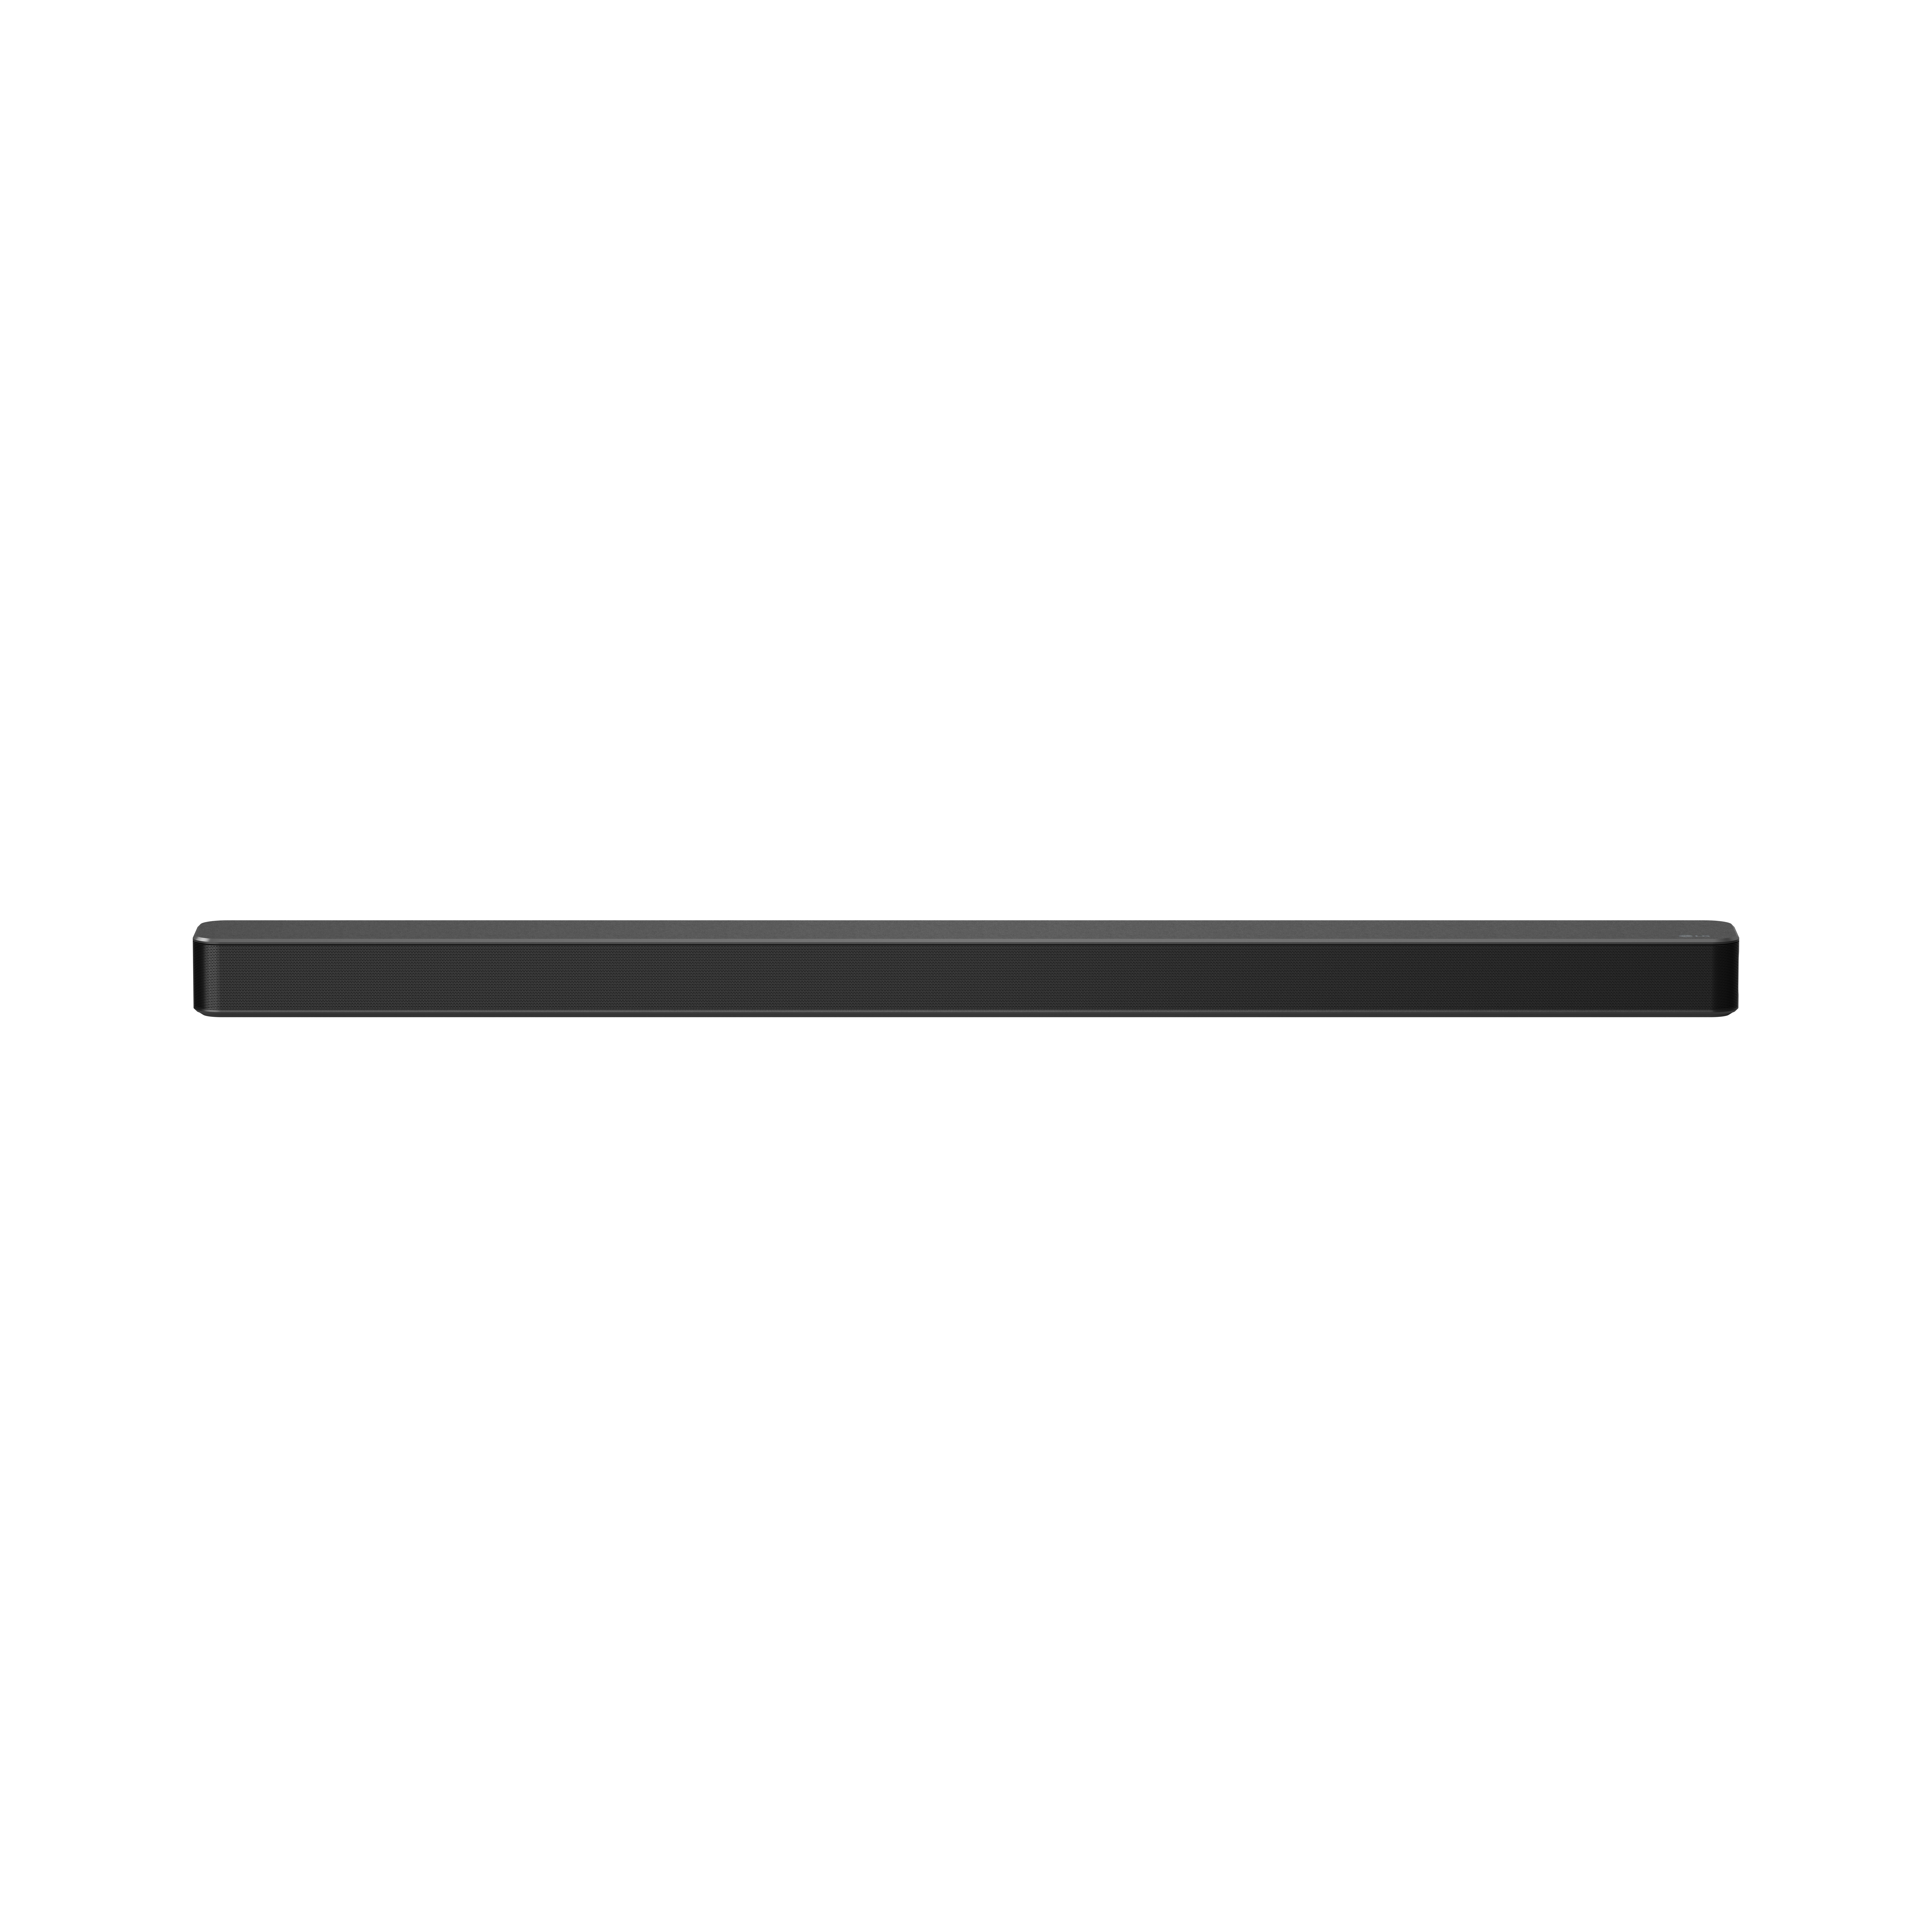 LG 3.1.2 Channel High Res Audio Soundbar with Dolby Atmos® and Goolge Assitant Built-In - SN8YG - image 3 of 17